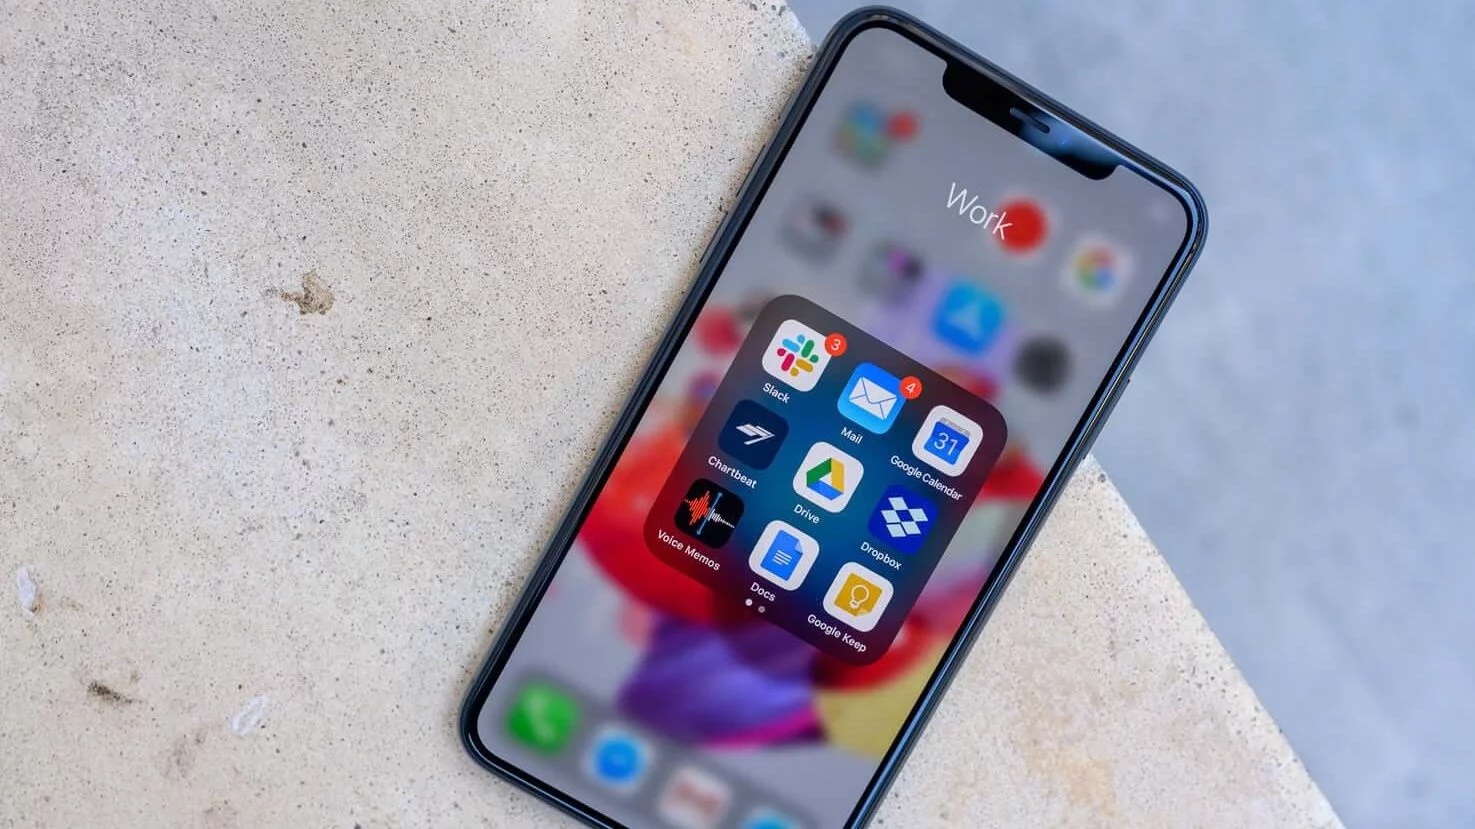 iOS 14 will Fully Support Third-Party Apps as Default